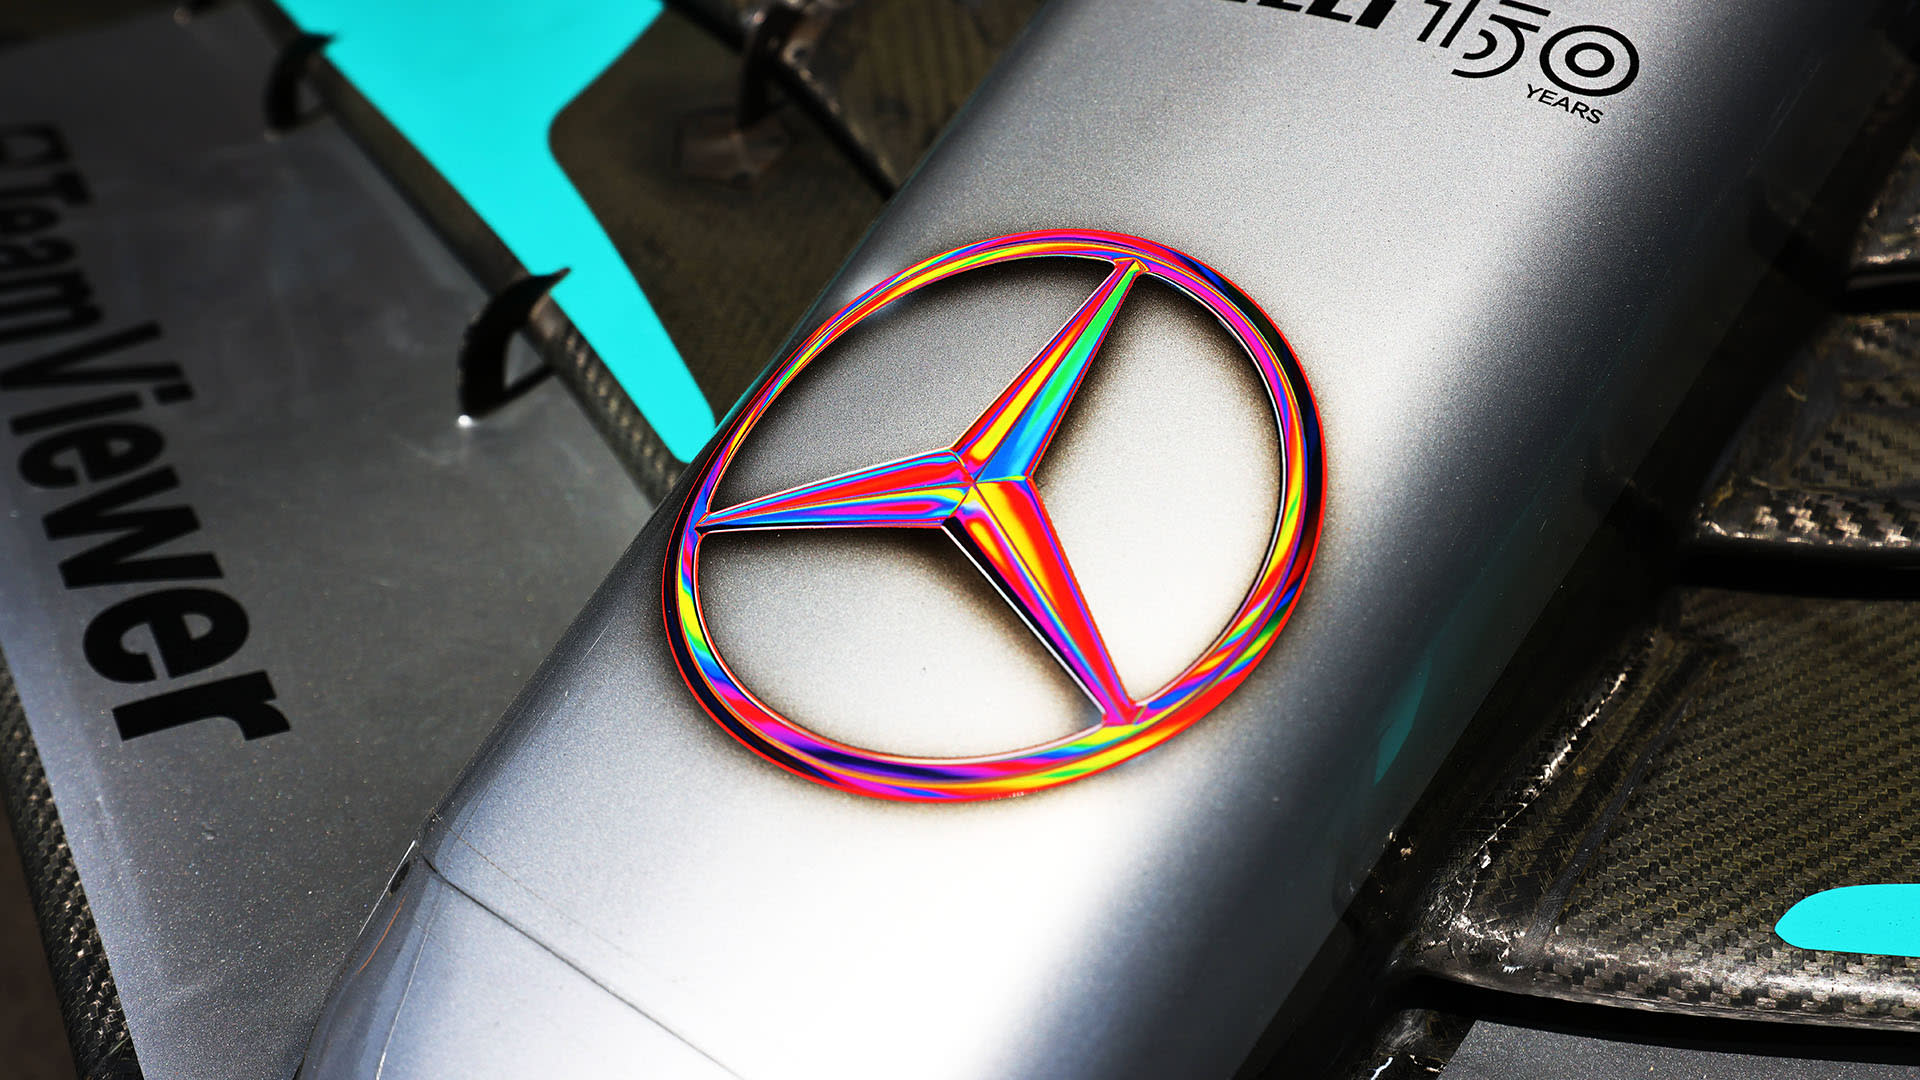 Mercedes changes logo to Pride colours for three F1 races - ESPN